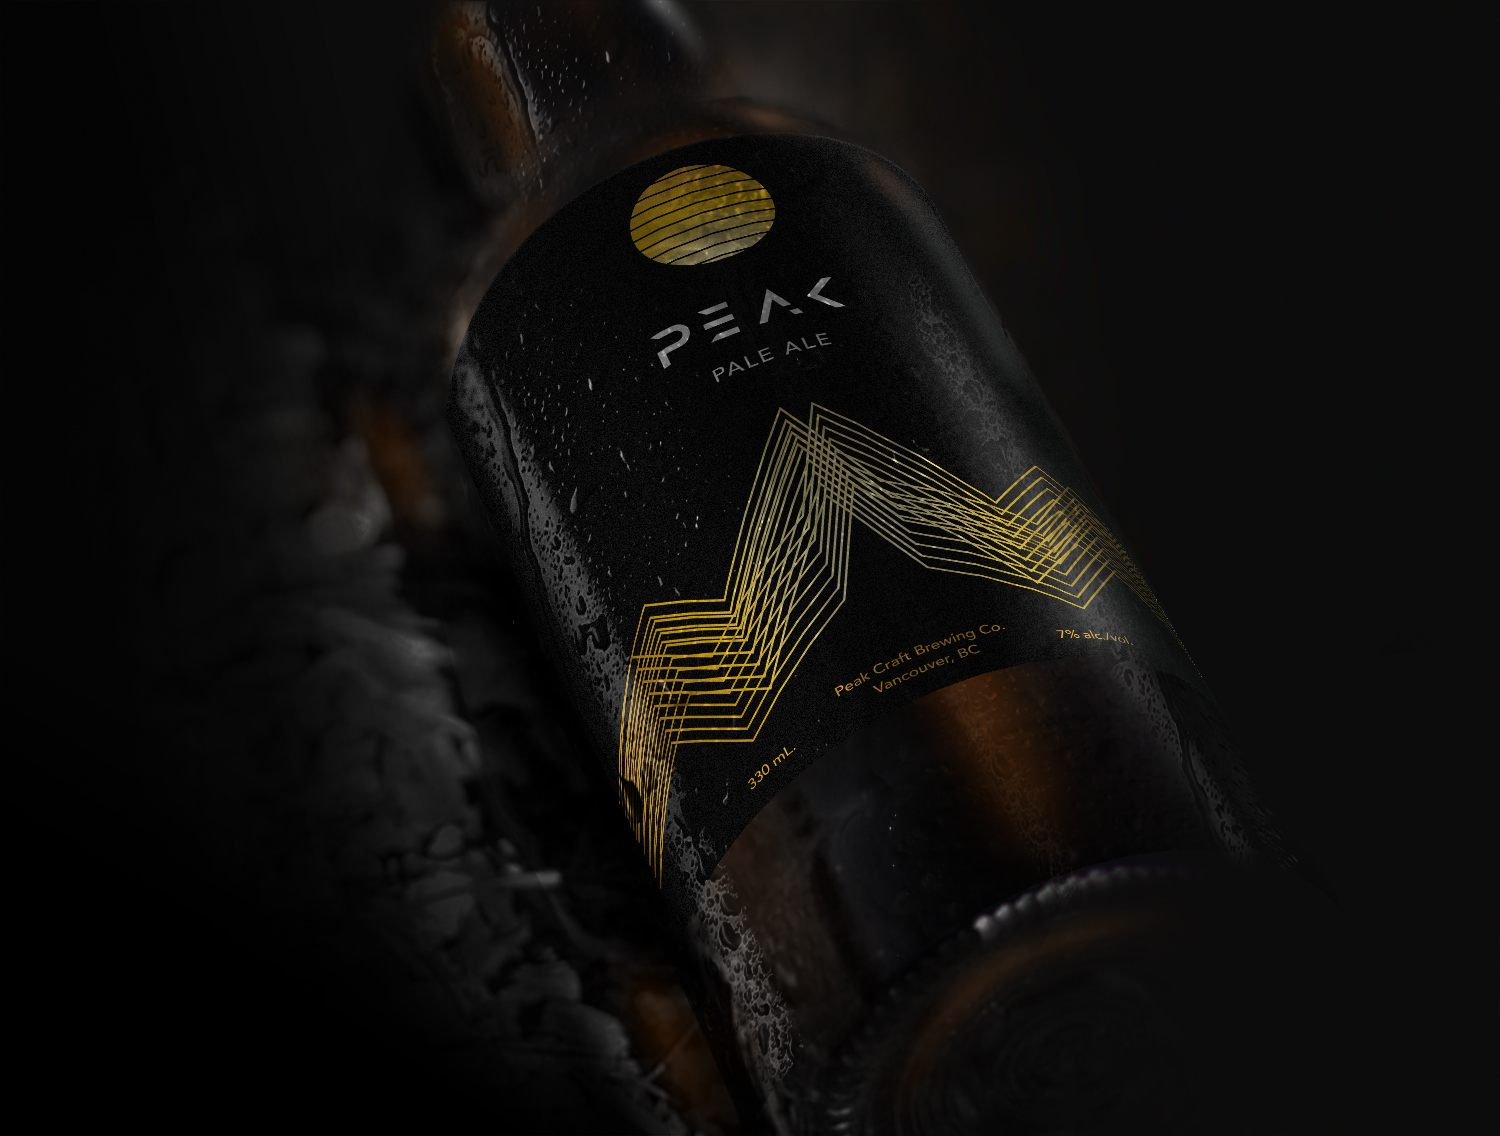 Geometrical Packaging Design for a Conceptual Craft Beer Brand, “Peak”